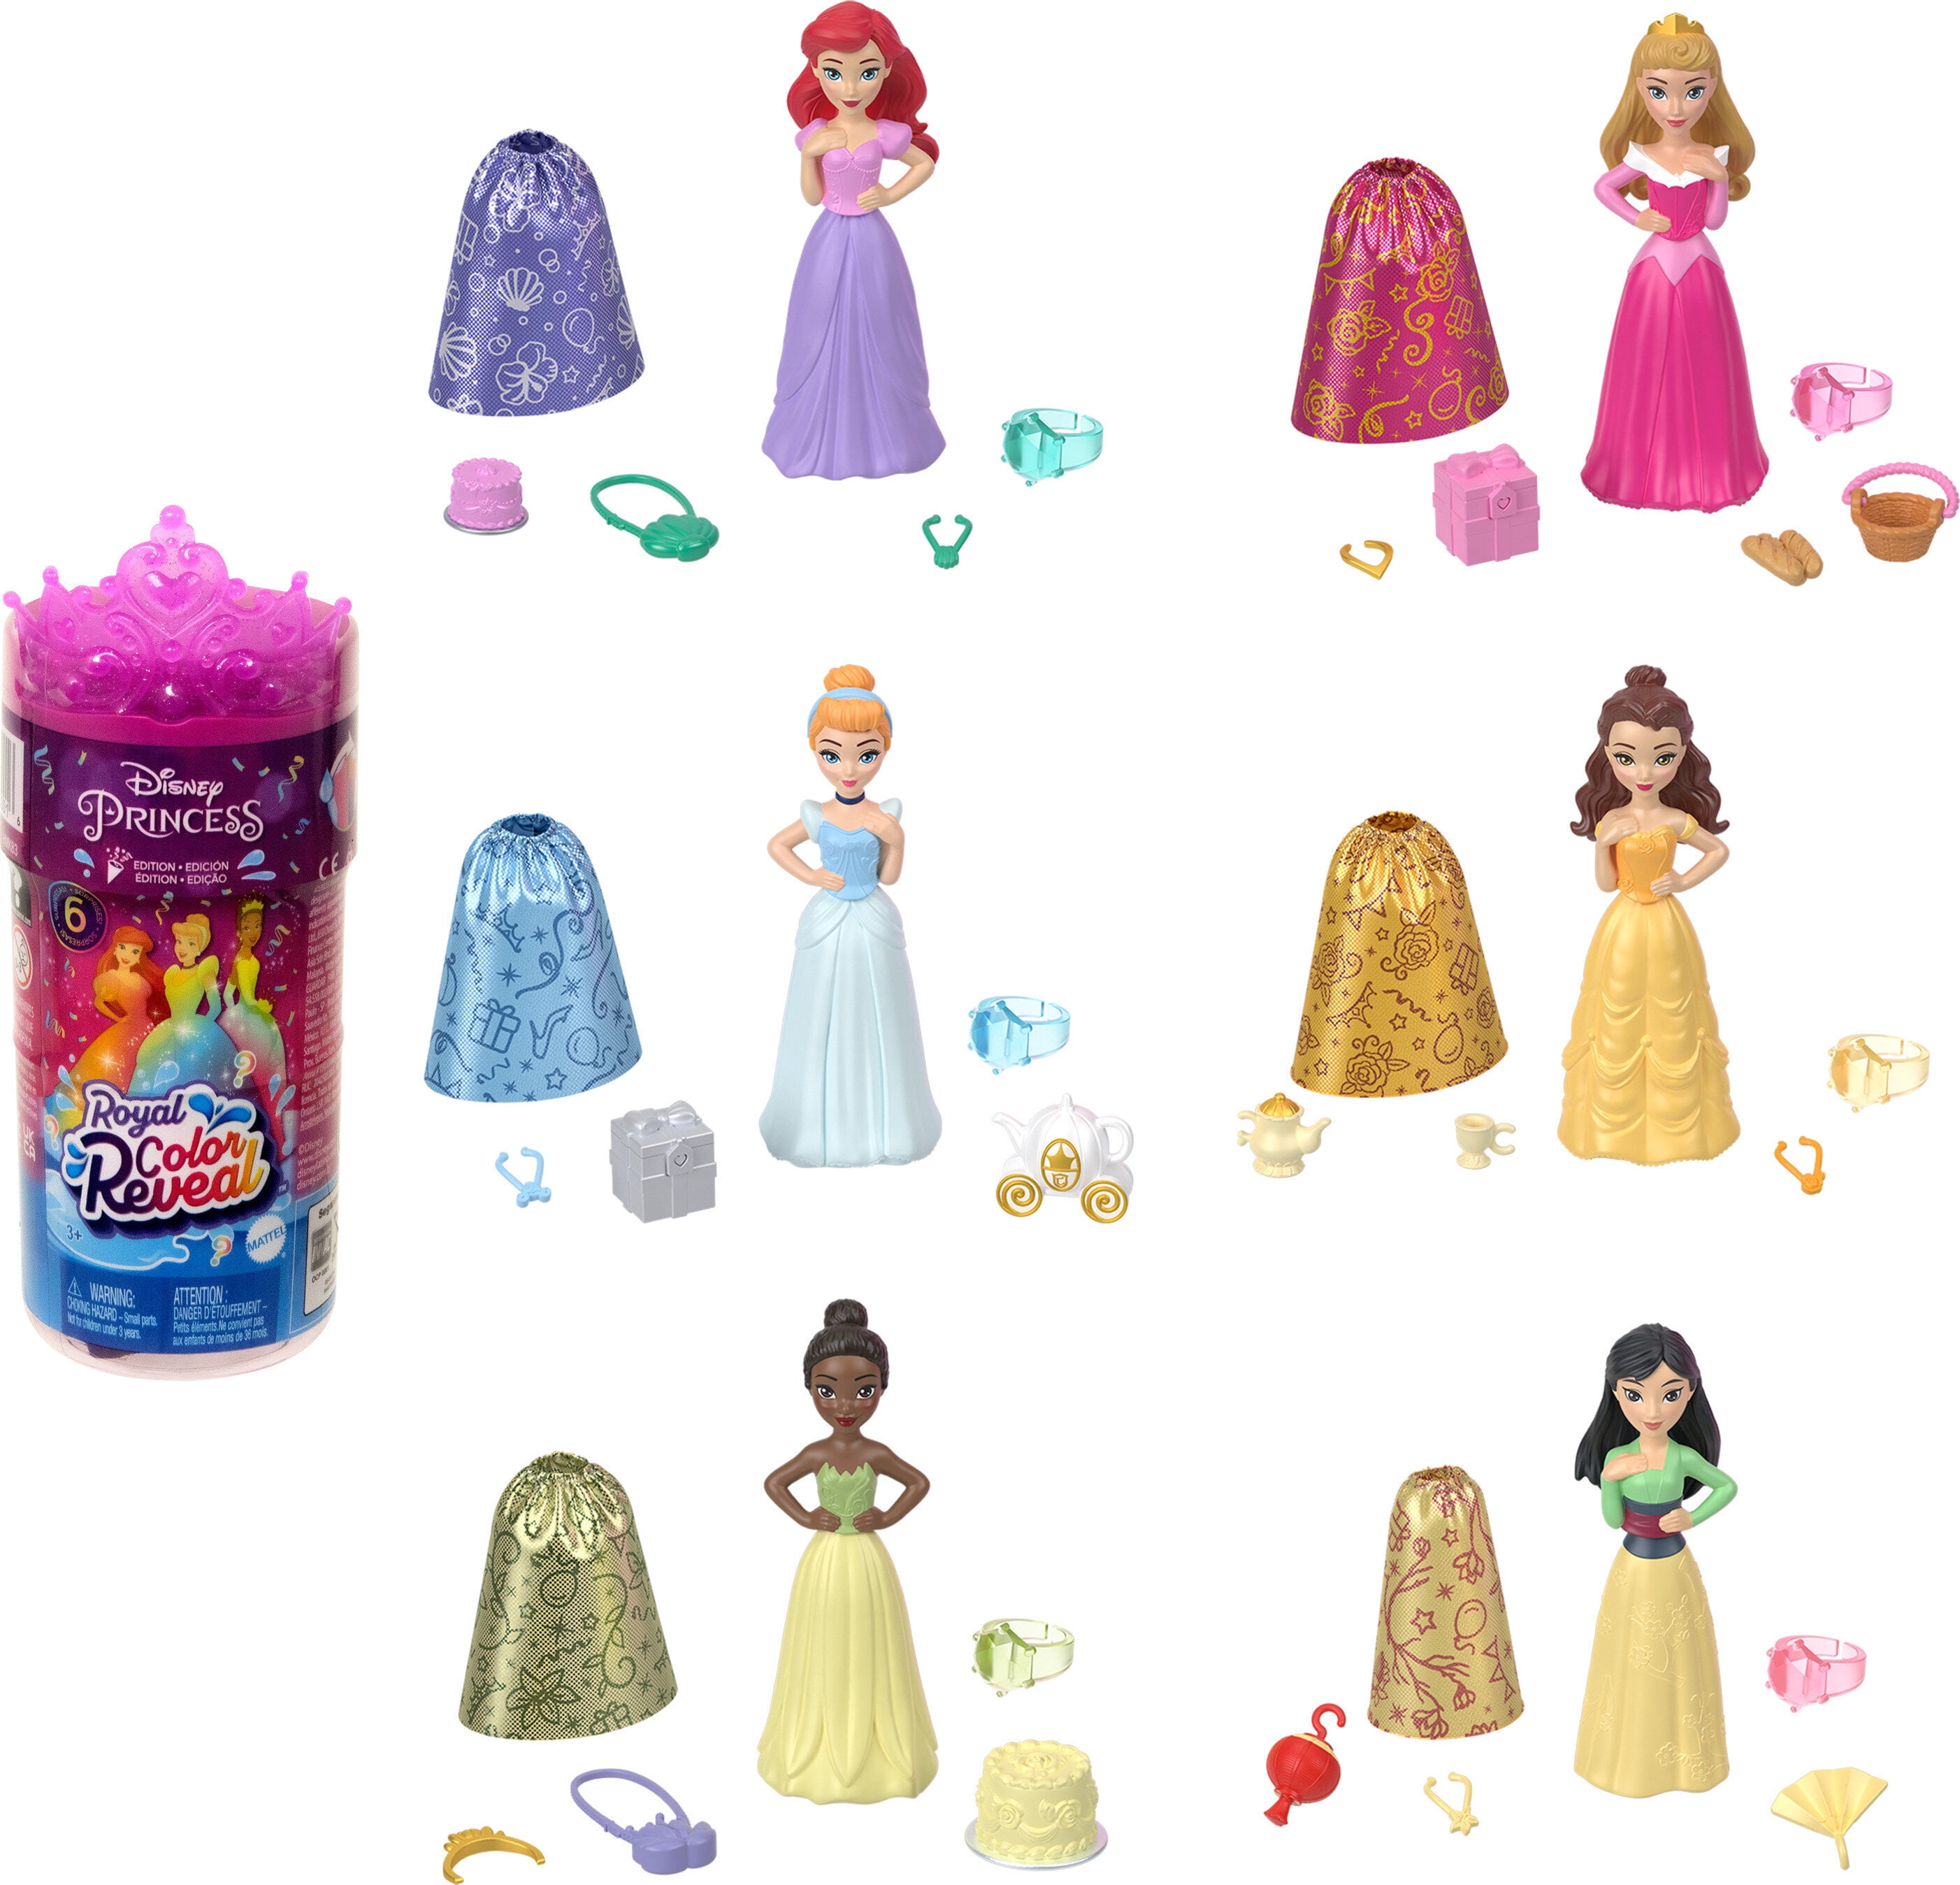 sigh guess we're not getting tiana…she's the only princess squish i